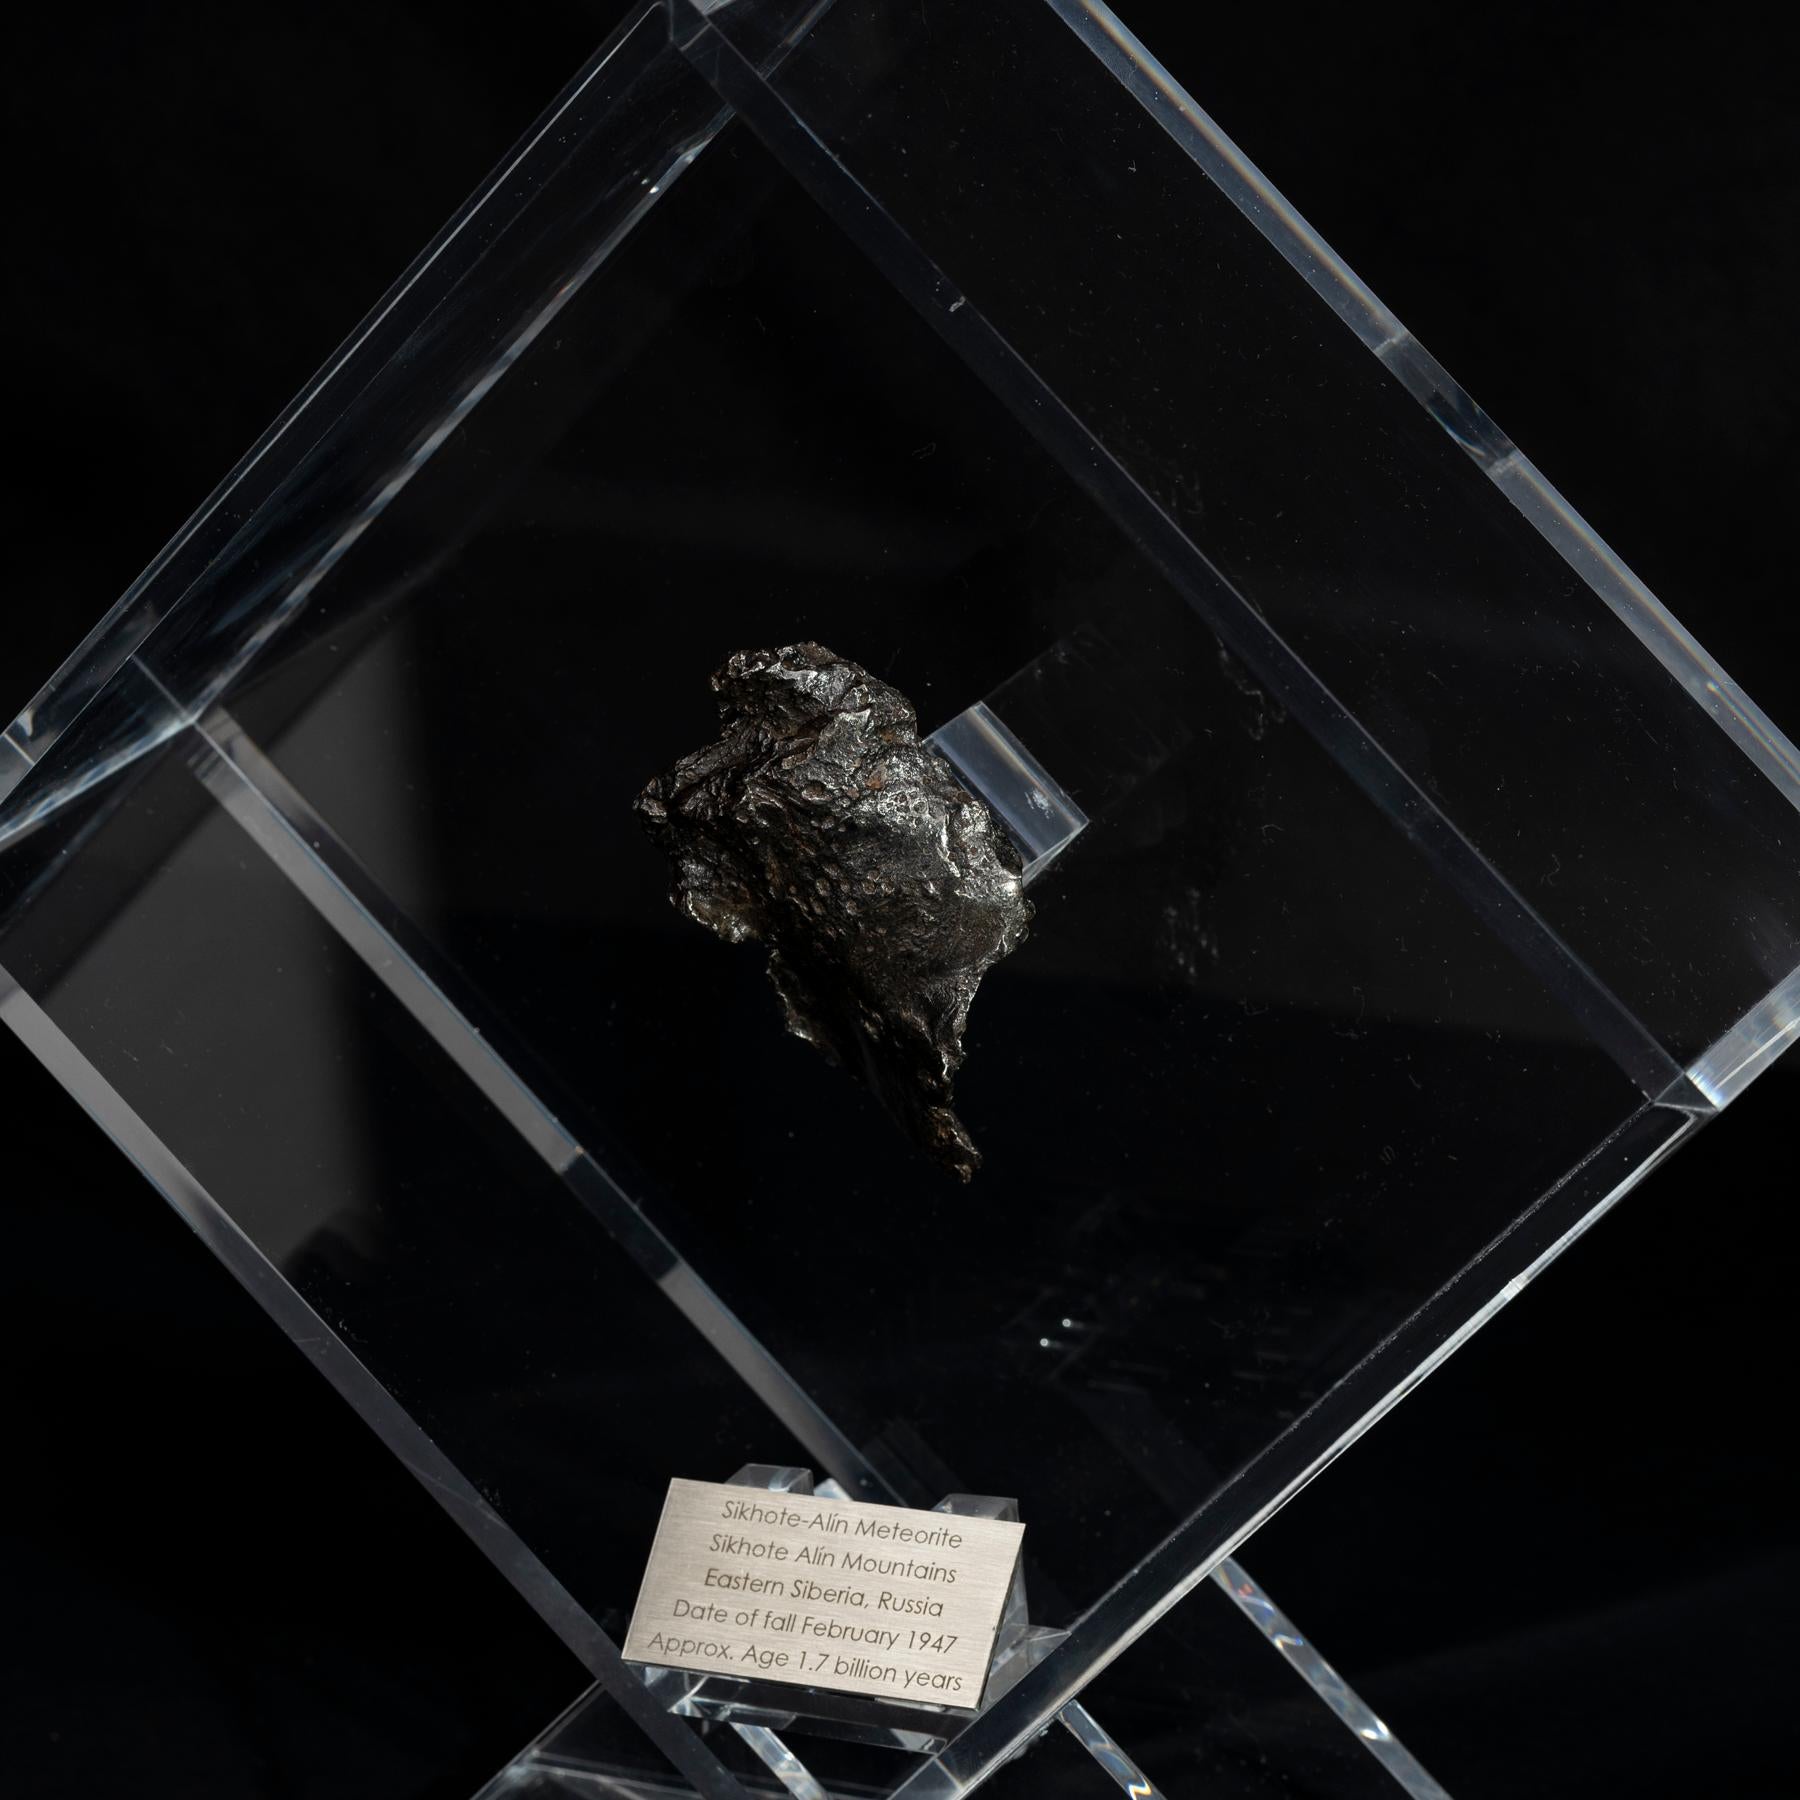 Mexican Sikhote Alin Meteorite from Siberia, Russia in a Custom Acrylic Display For Sale